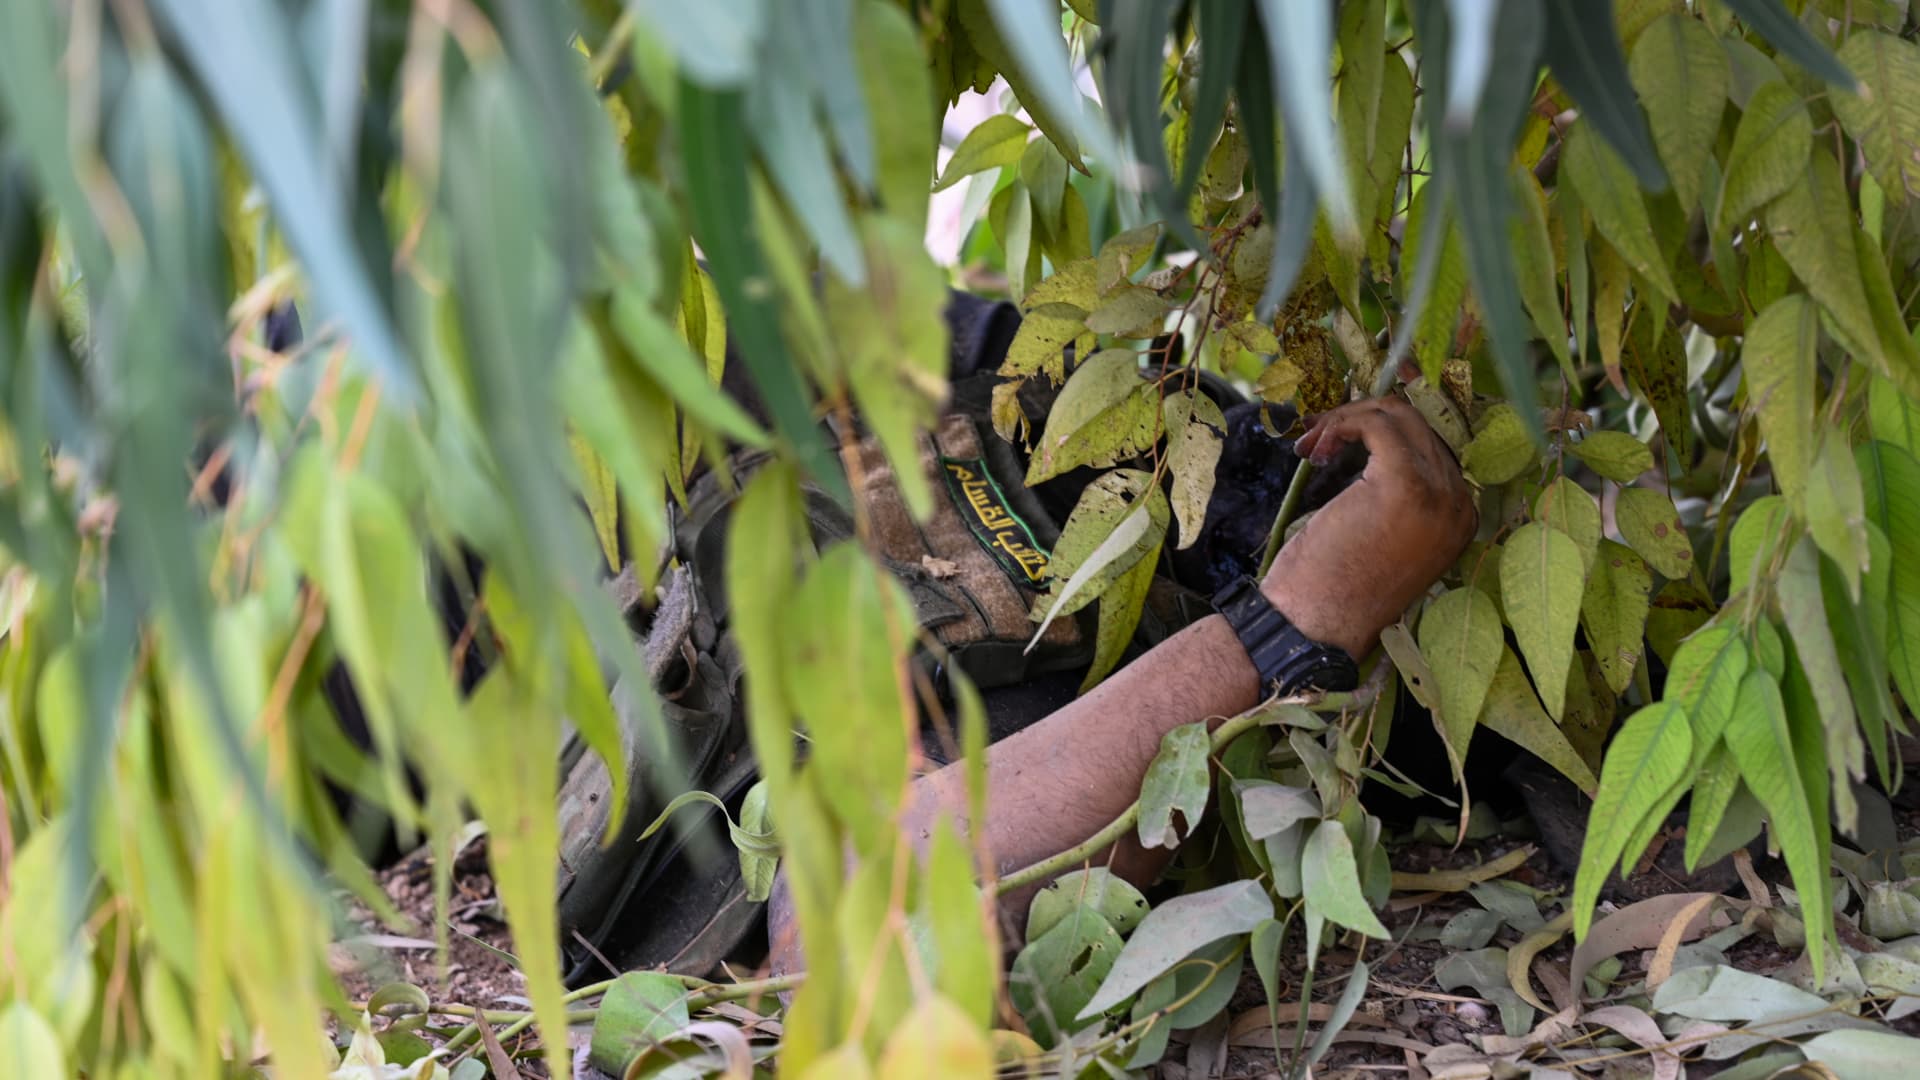 KFAR AZA, ISRAEL - OCTOBER 10: (EDITOR'S NOTE: Image depicts death.) The body of a dead Hamas militant who hid in the bushes lies on the ground at the kibbutz Kfar Aza on October 10, 2023 in Kfar Aza, Israel.